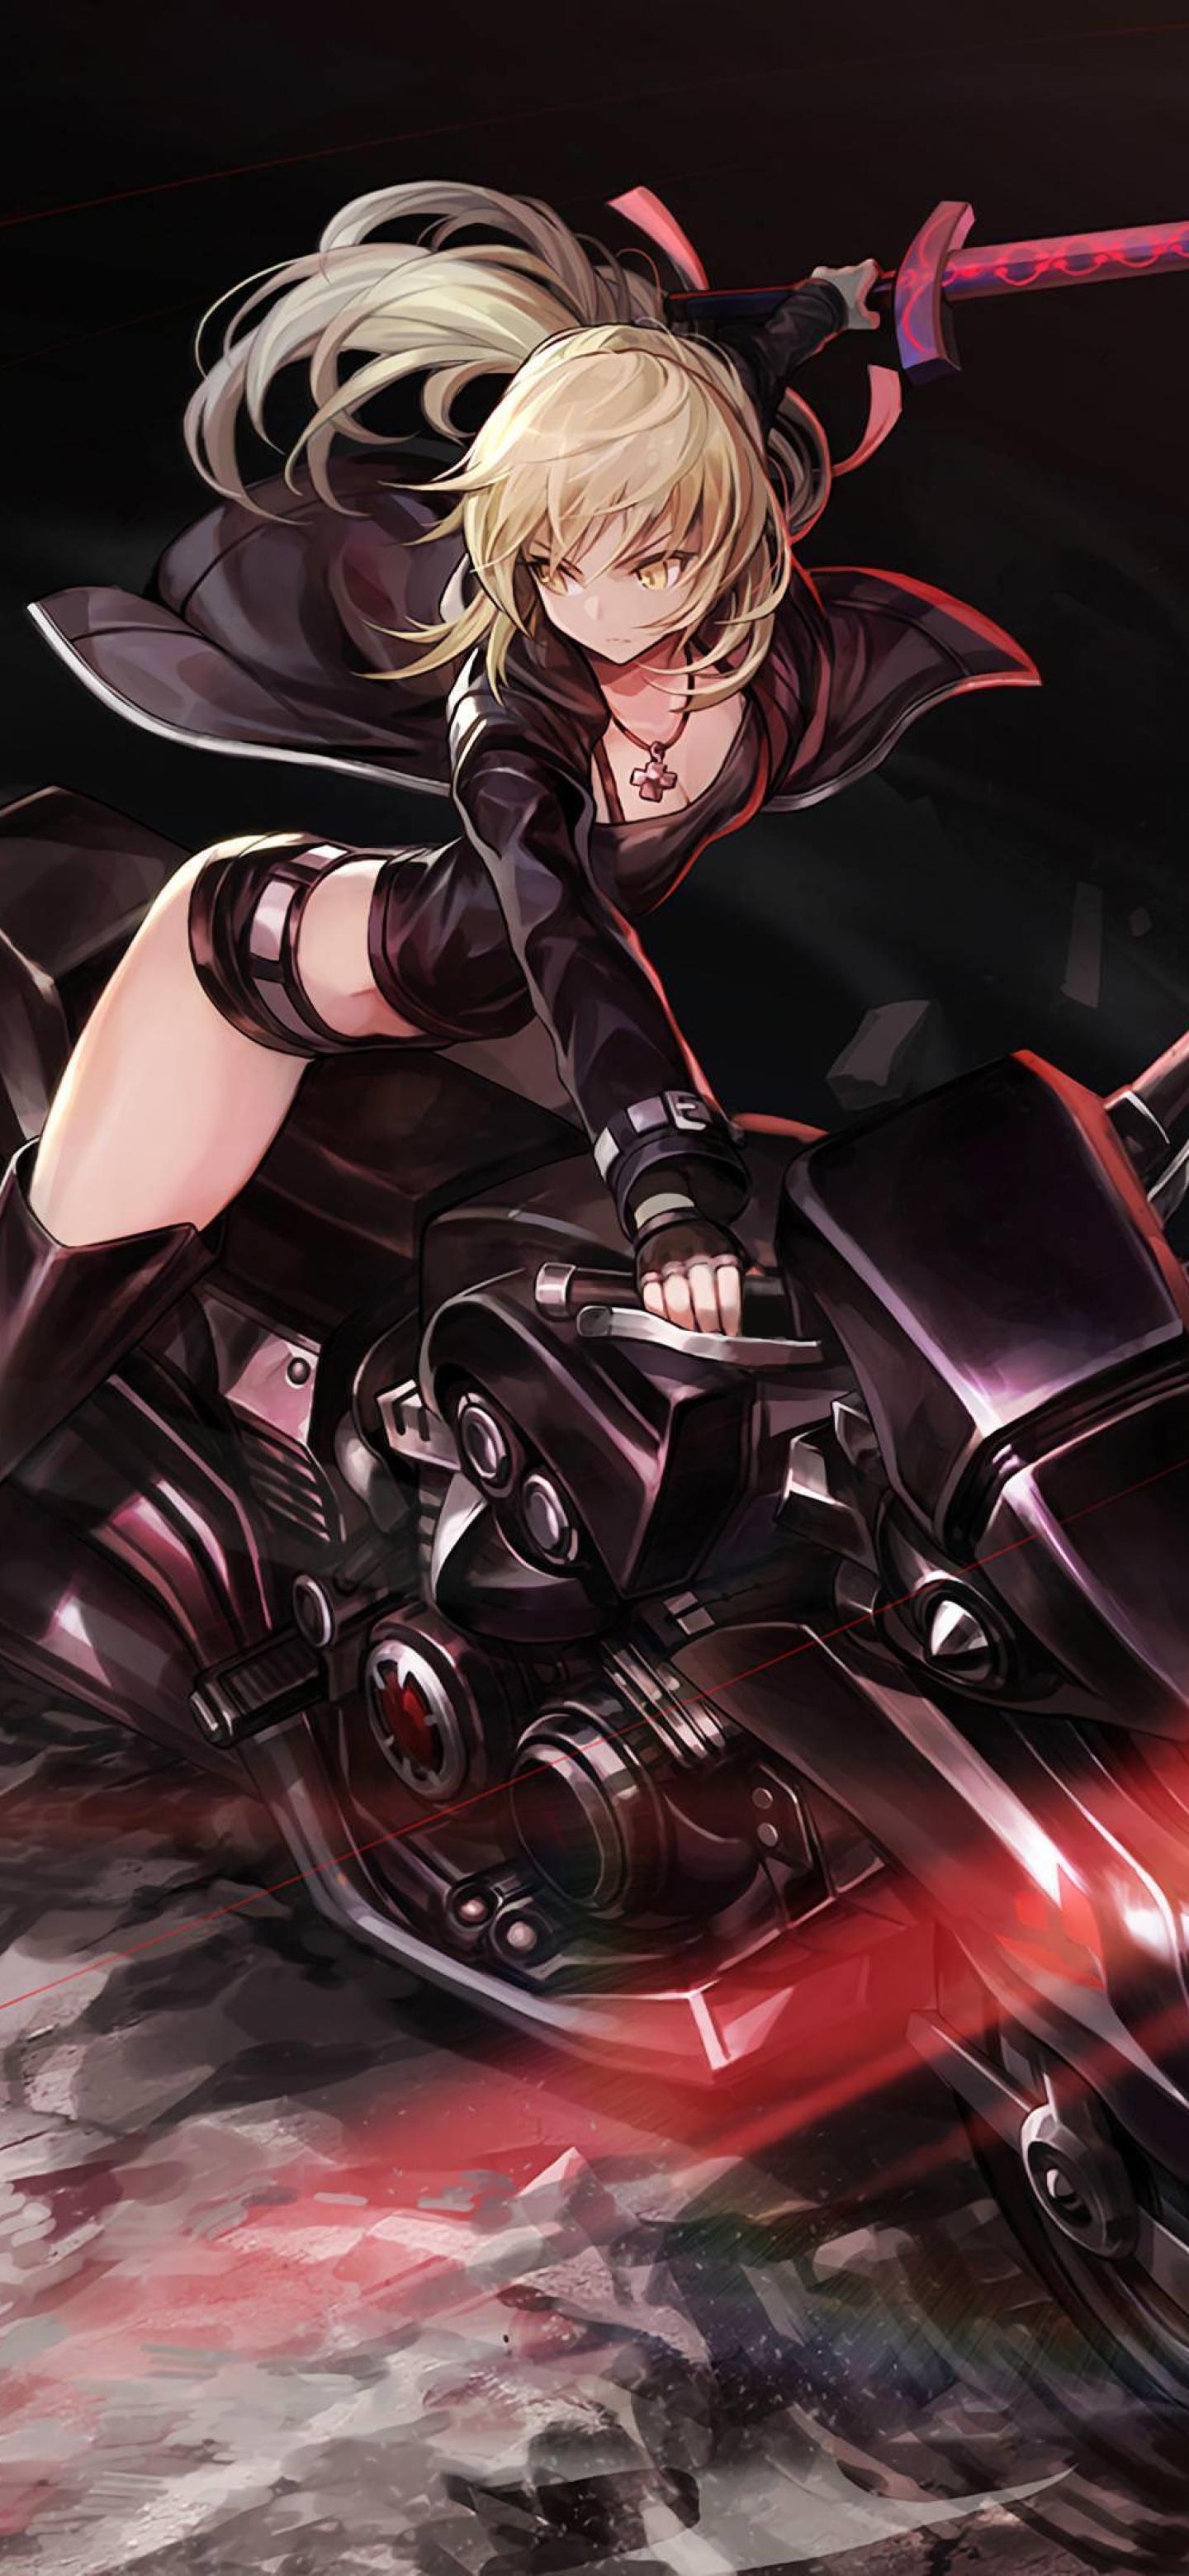 1440x31 Saber Alter Fate 1440x31 Resolution Wallpaper Hd Anime 4k Wallpapers Images Photos And Background